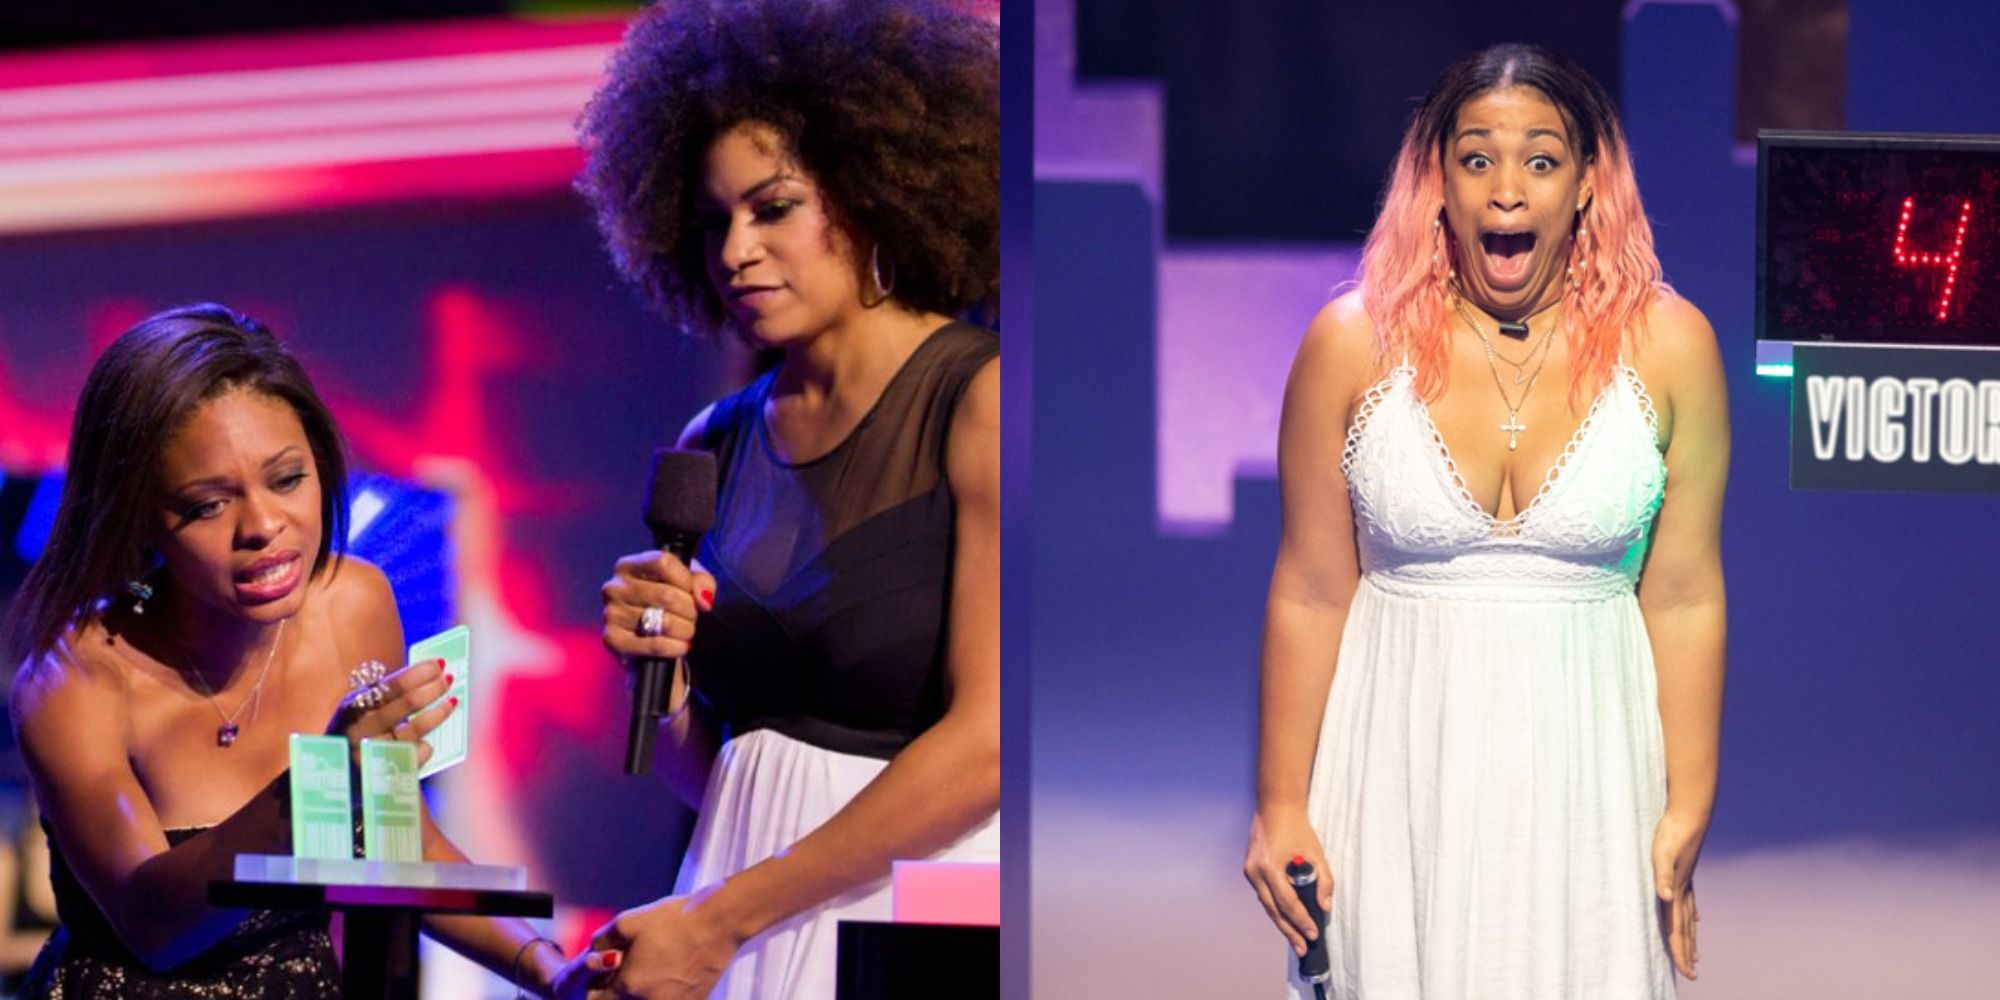 Split image showing Topaz and Victoria in Big Brother Canada